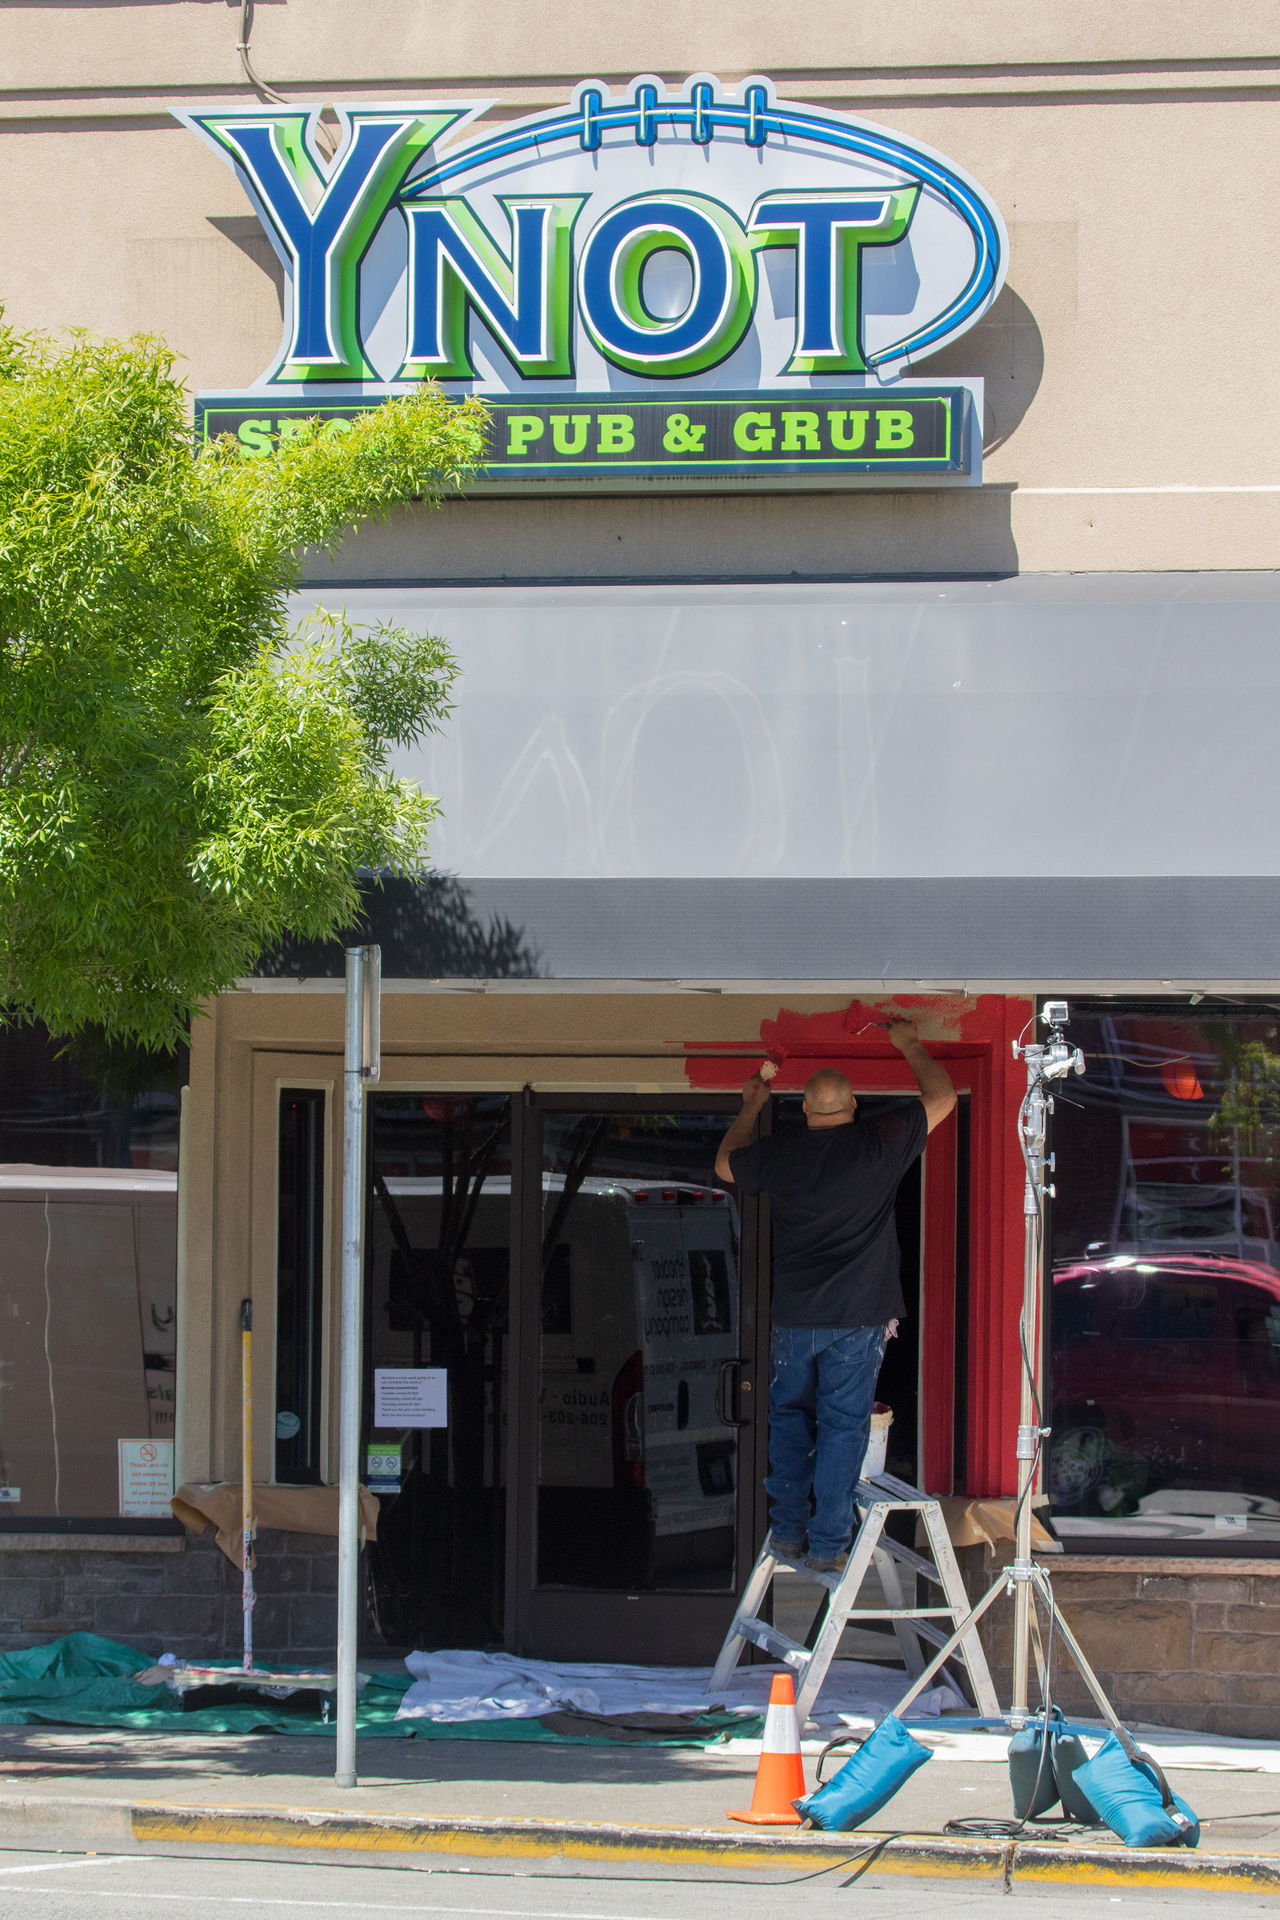 A man paints the outside at Ynot Sports Pub and Grub on Hewitt Avenue in Everett on Wednesday. A crew from the Spike TV show “Bar Rescue” is in town this week to remodel the bar for its TV show.